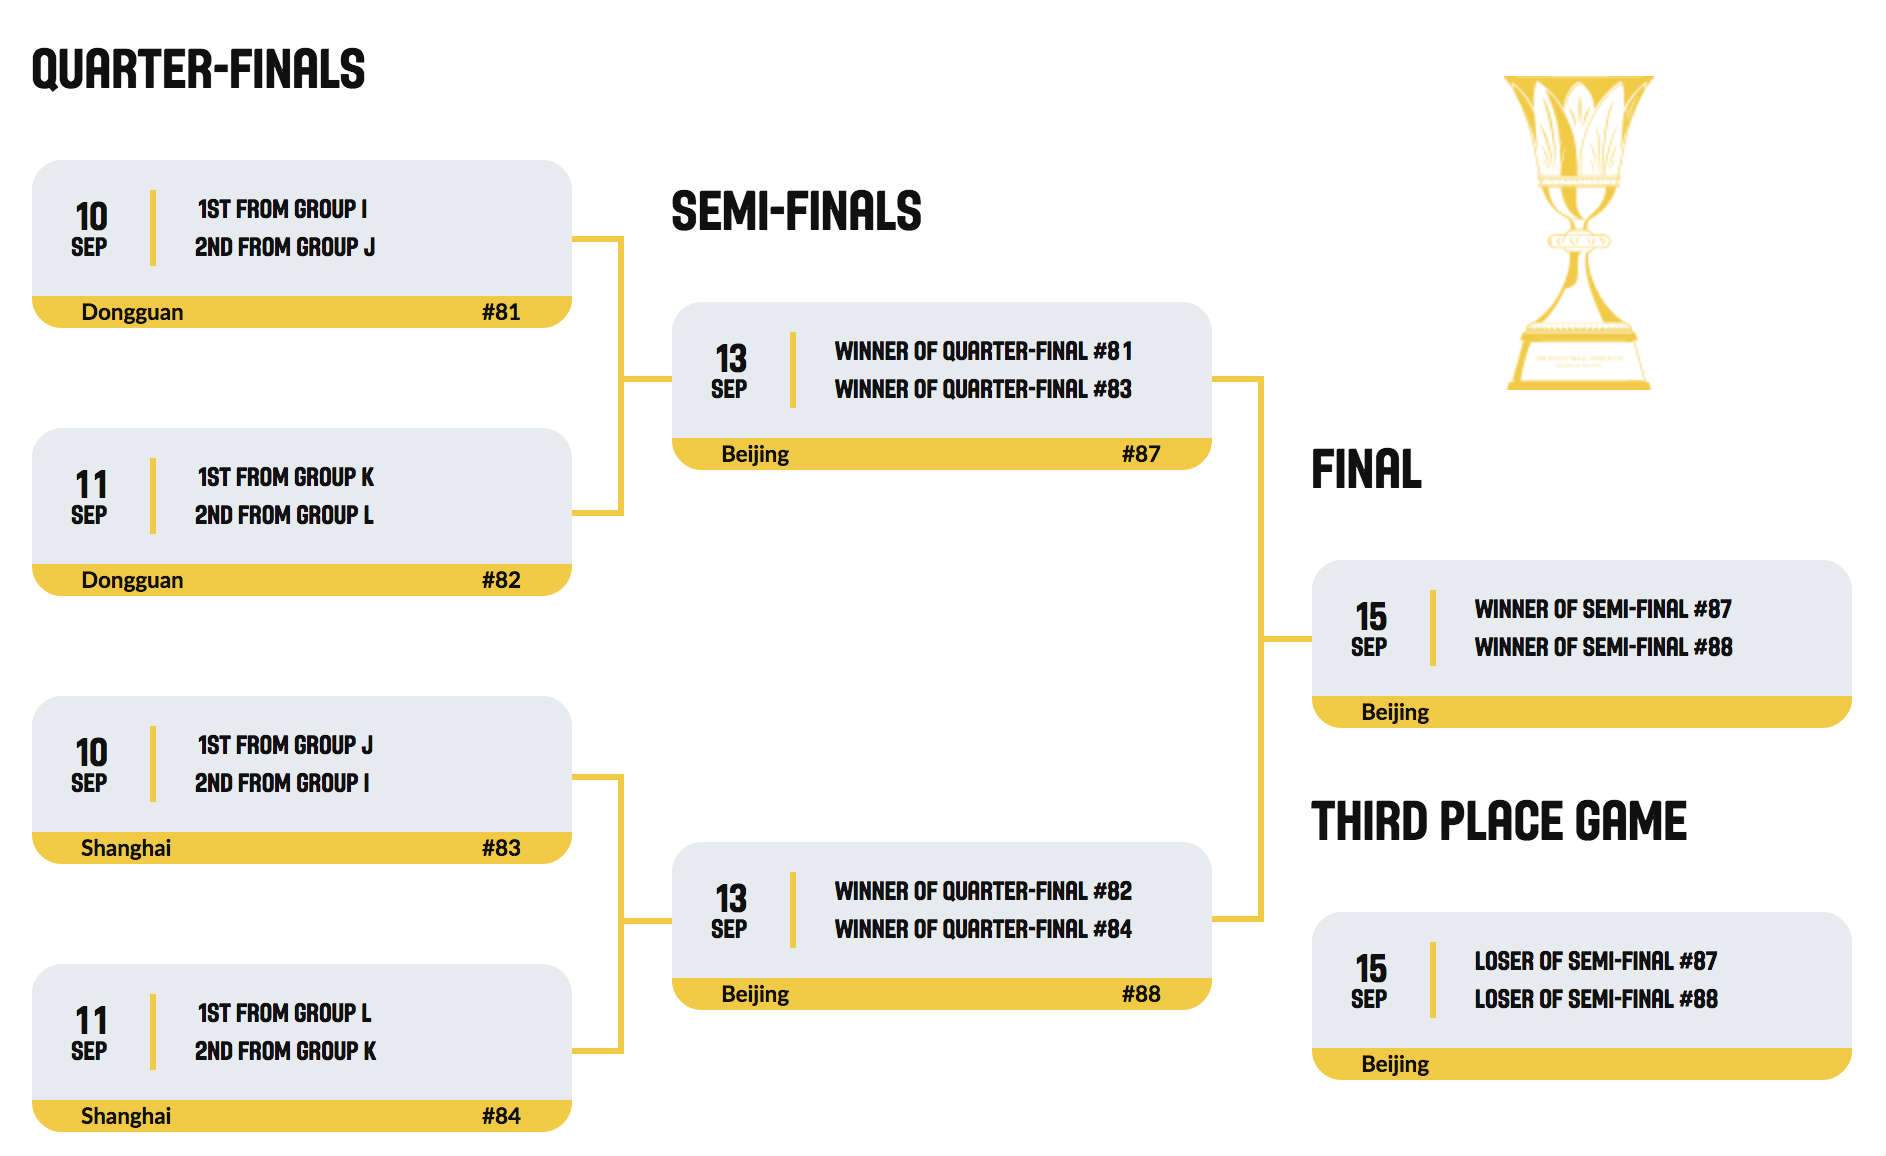 The finals system